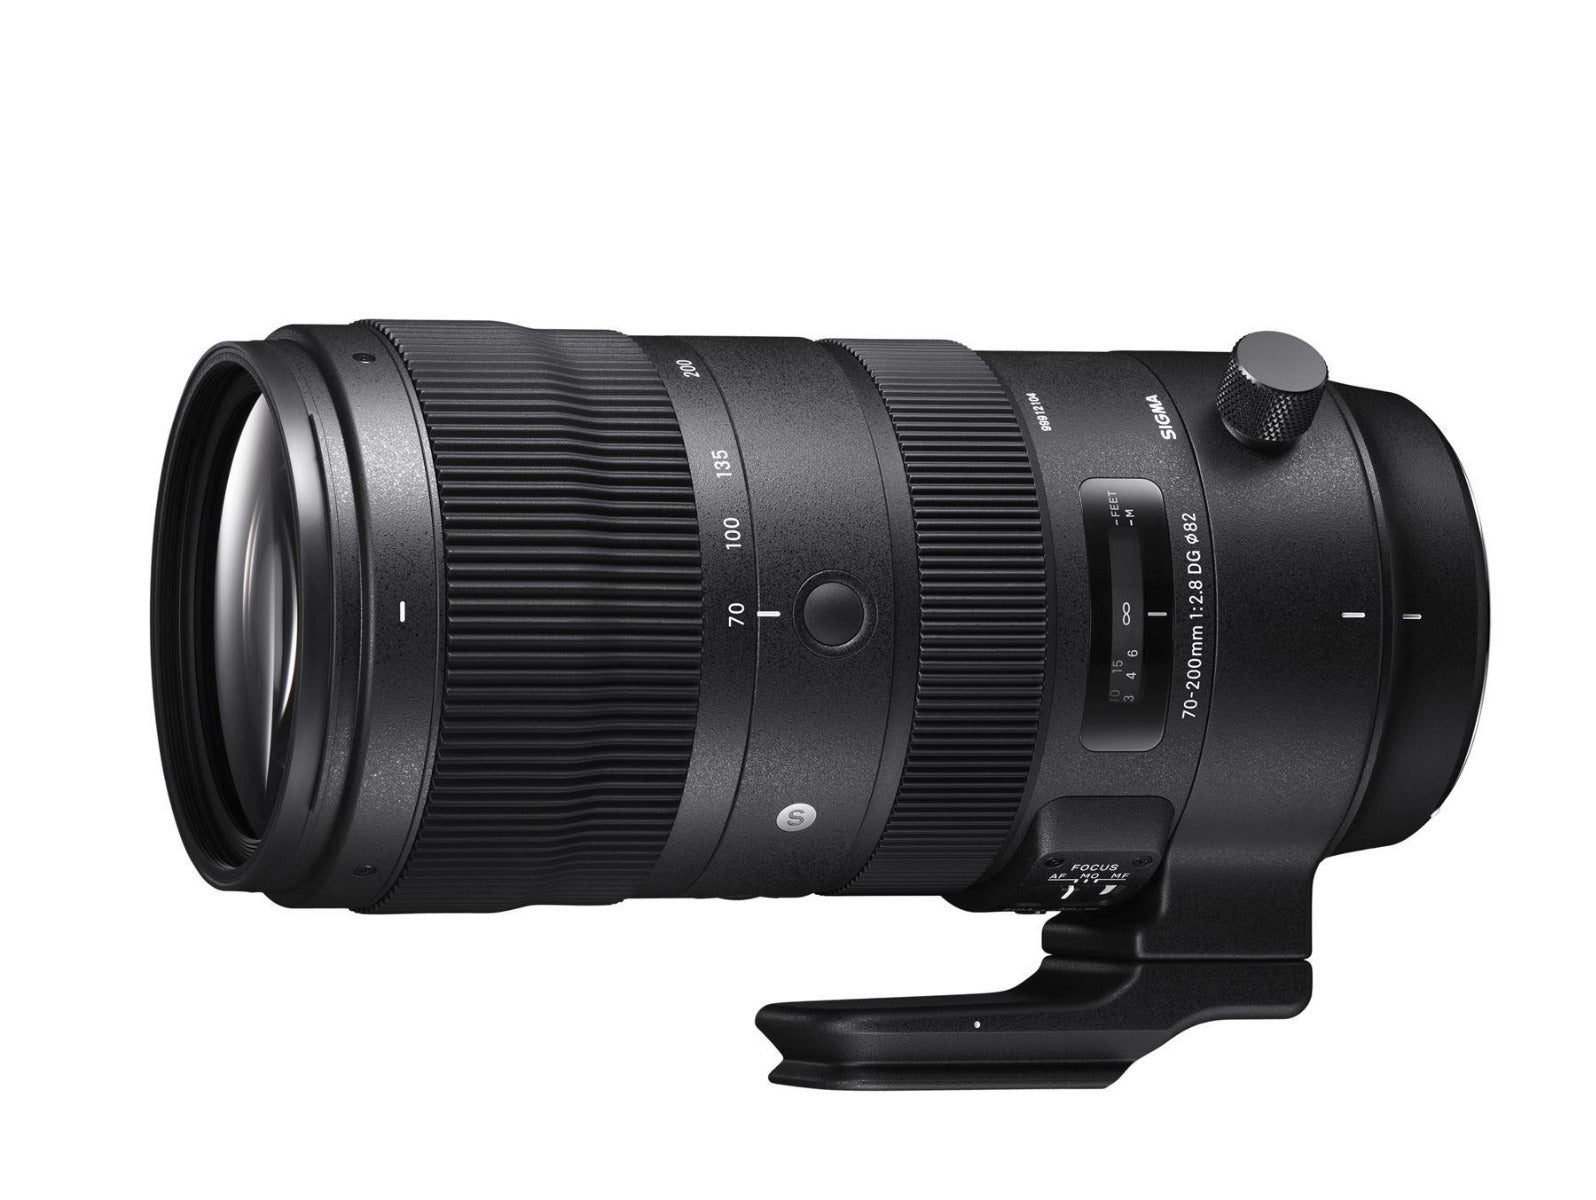 Product Image of Sigma 70-200mm f2.8 DG OS HSM Sports Lens